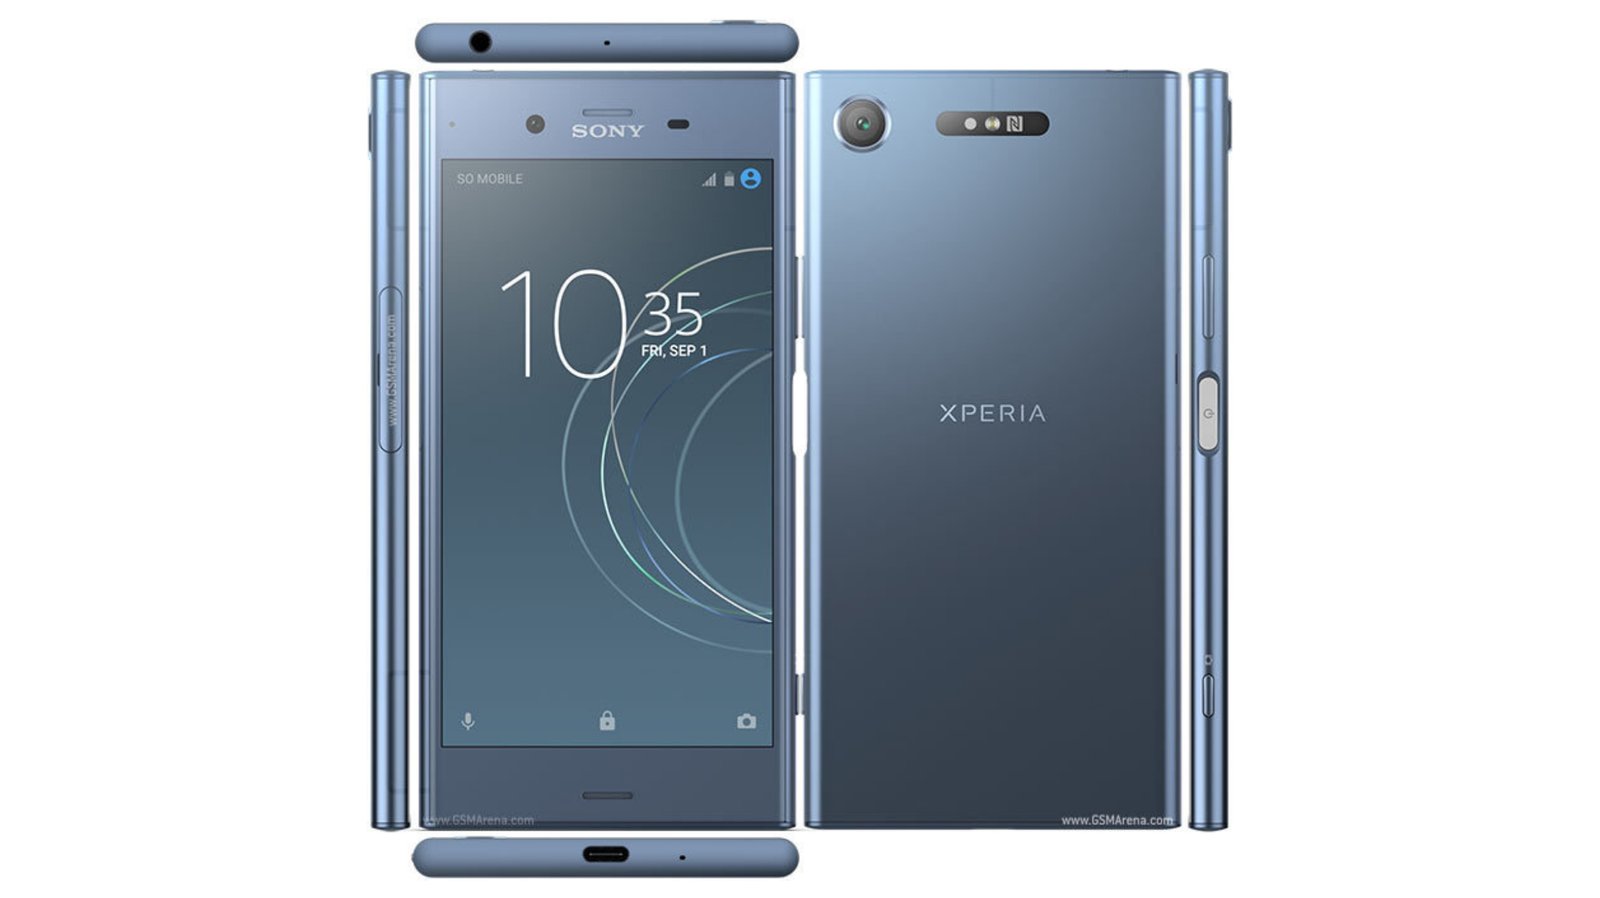 Sony-Xperia-XZ1-Specs-Price-and-Review